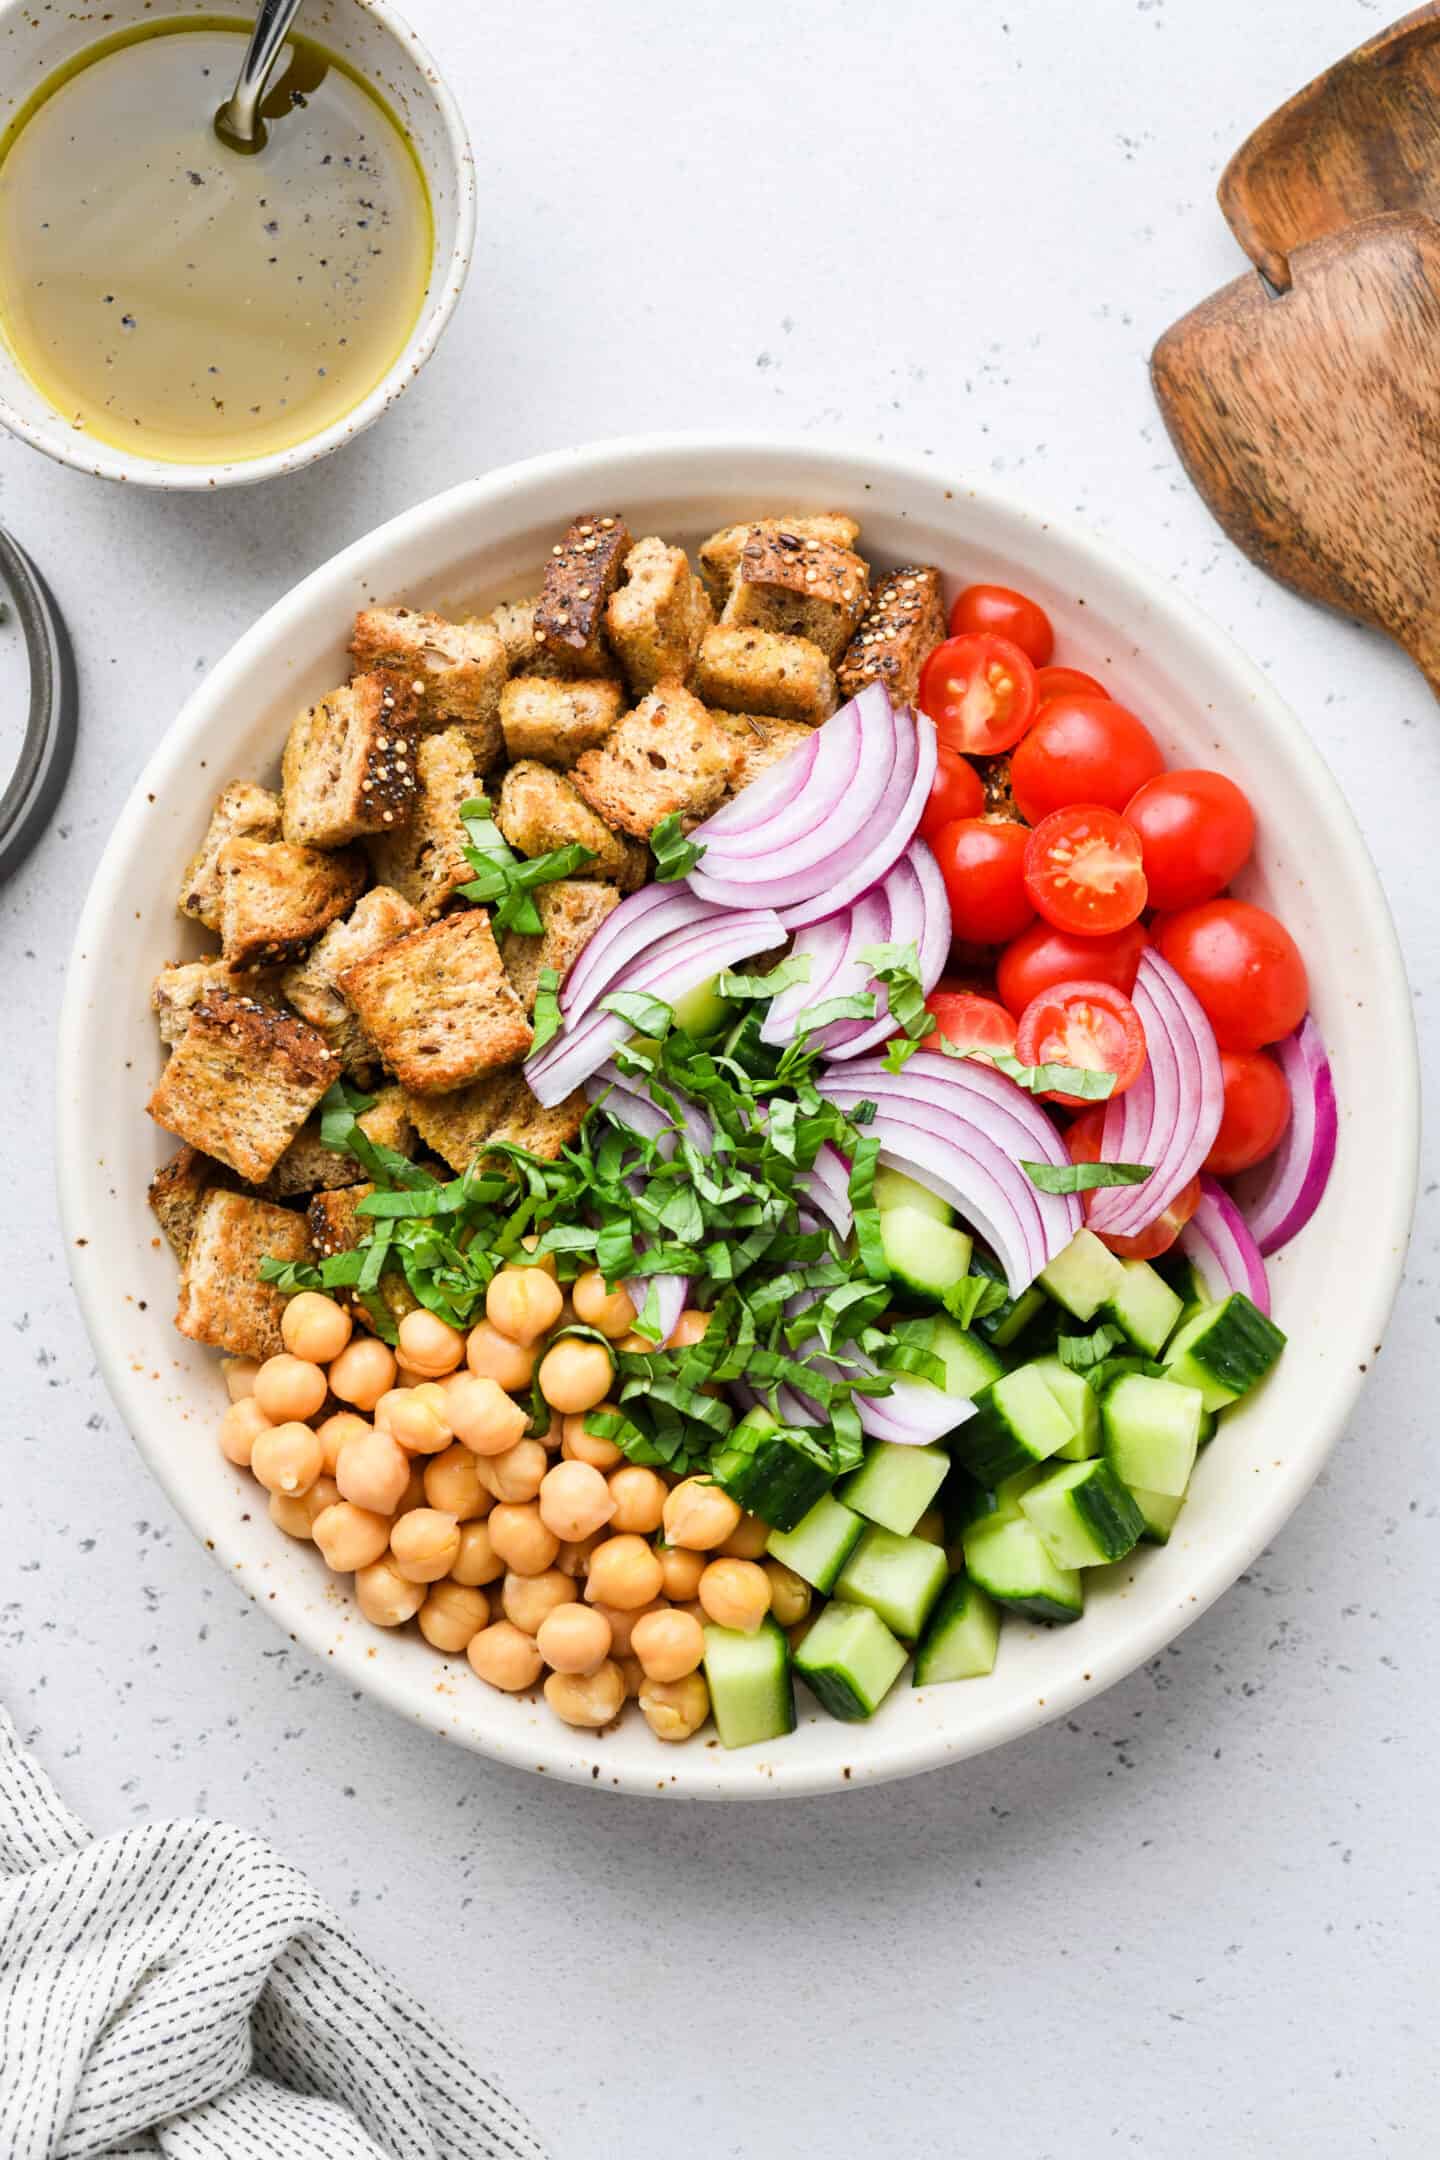 Chickpea panzanella salad in glass mixing bowl